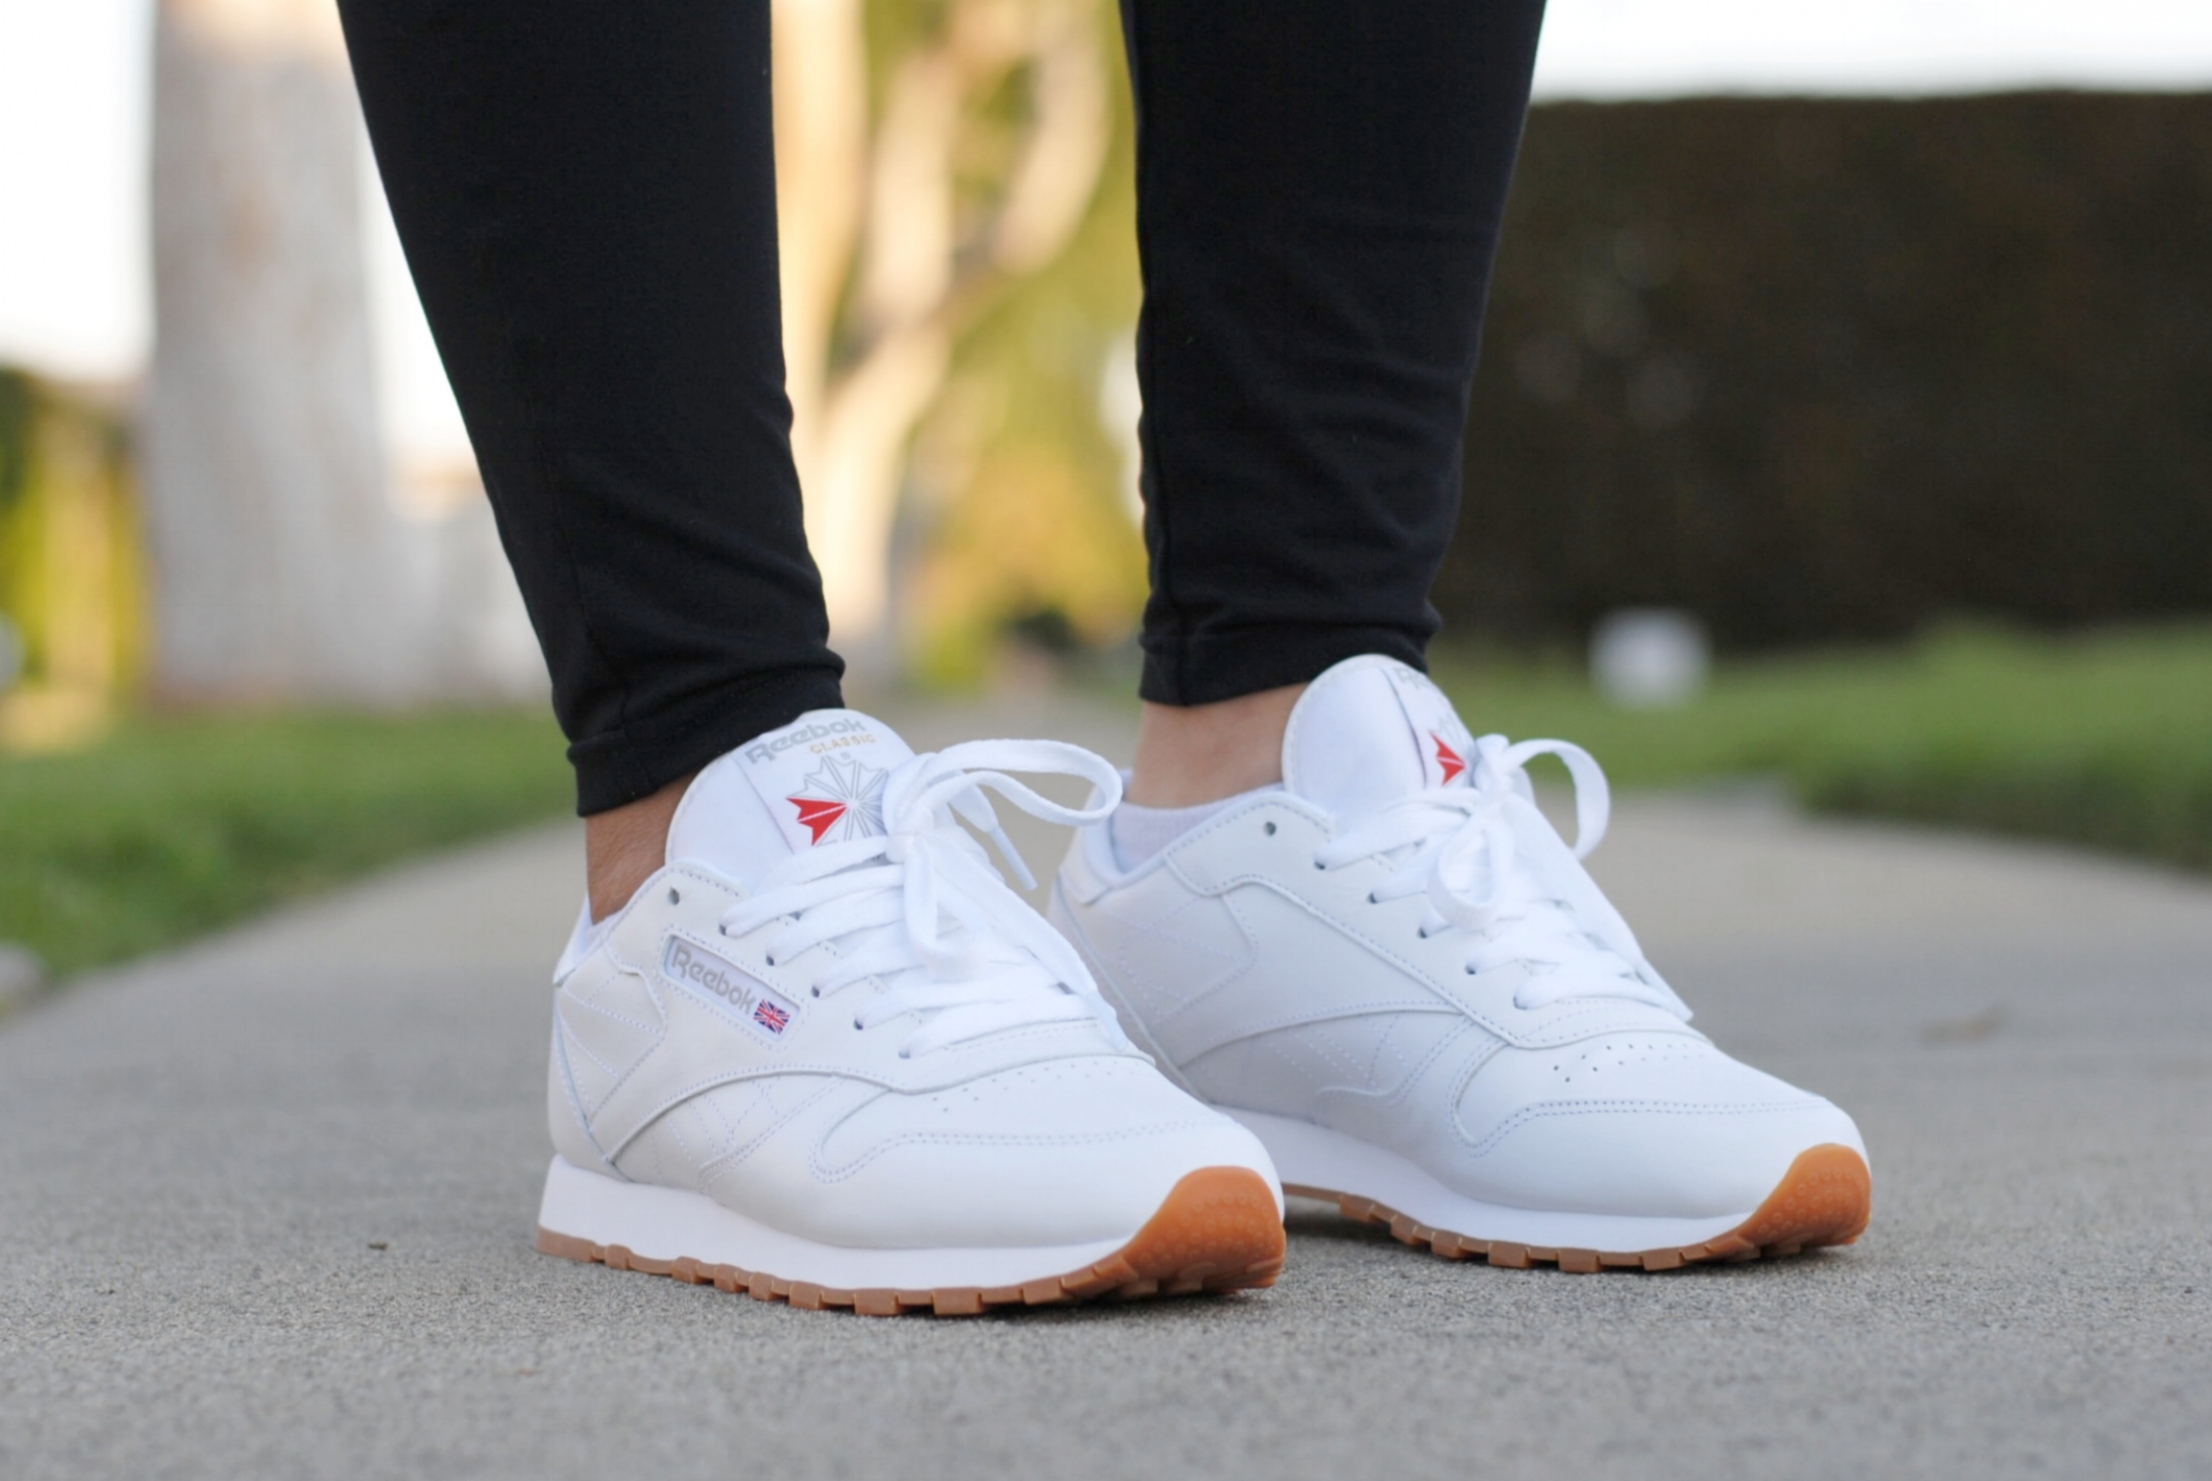 Classic Leather Day 4.12 // Reebok 